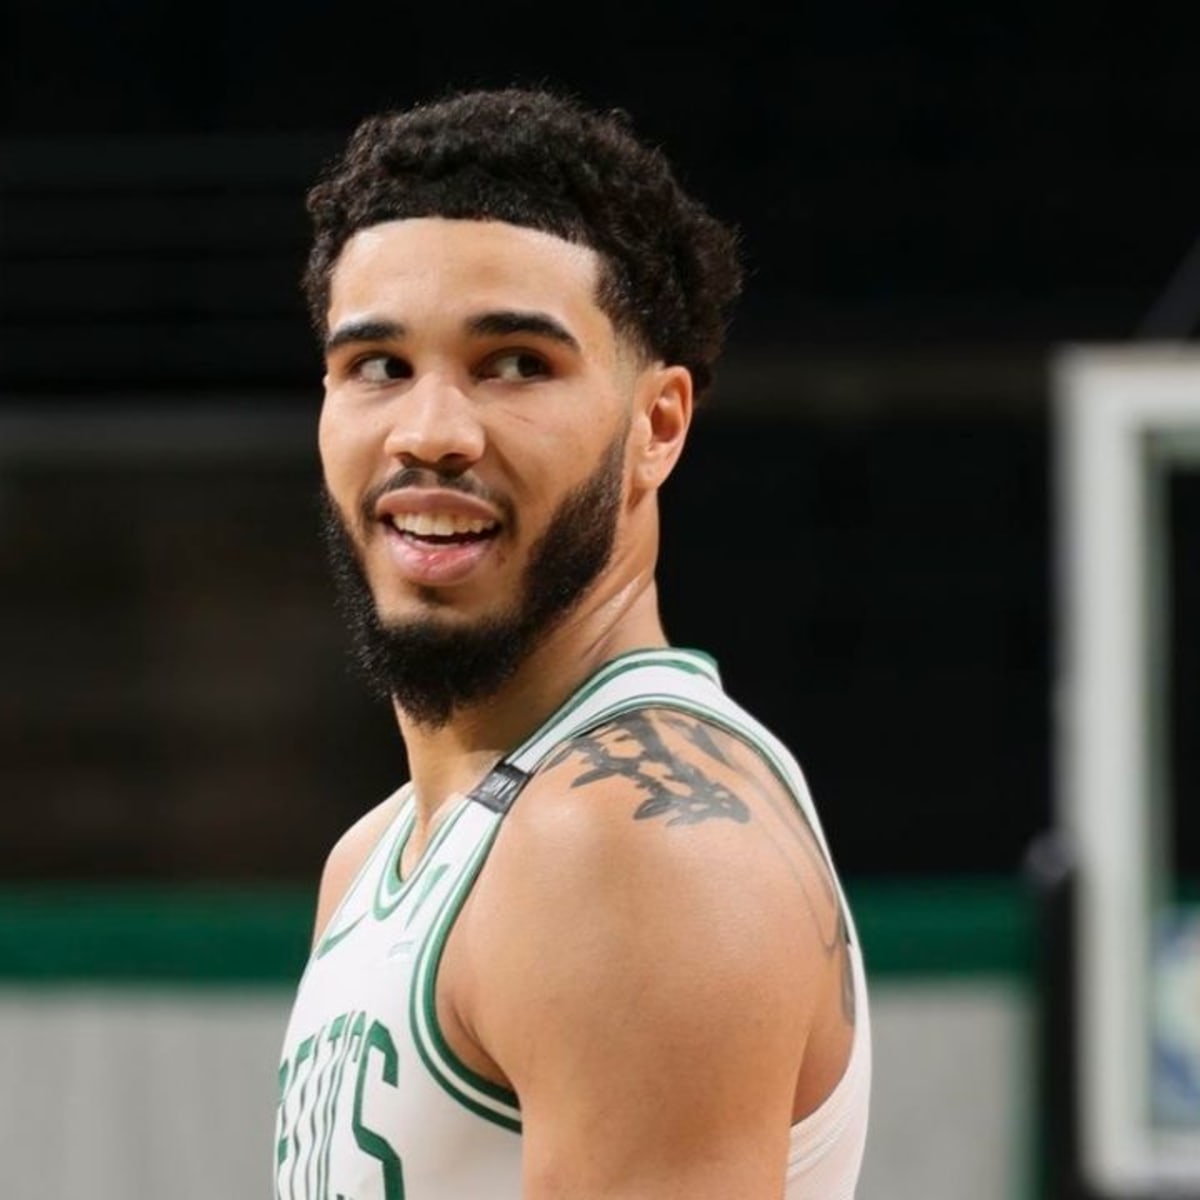 Now he's gotta be a “killer?” Jayson Tatum has what it takes to